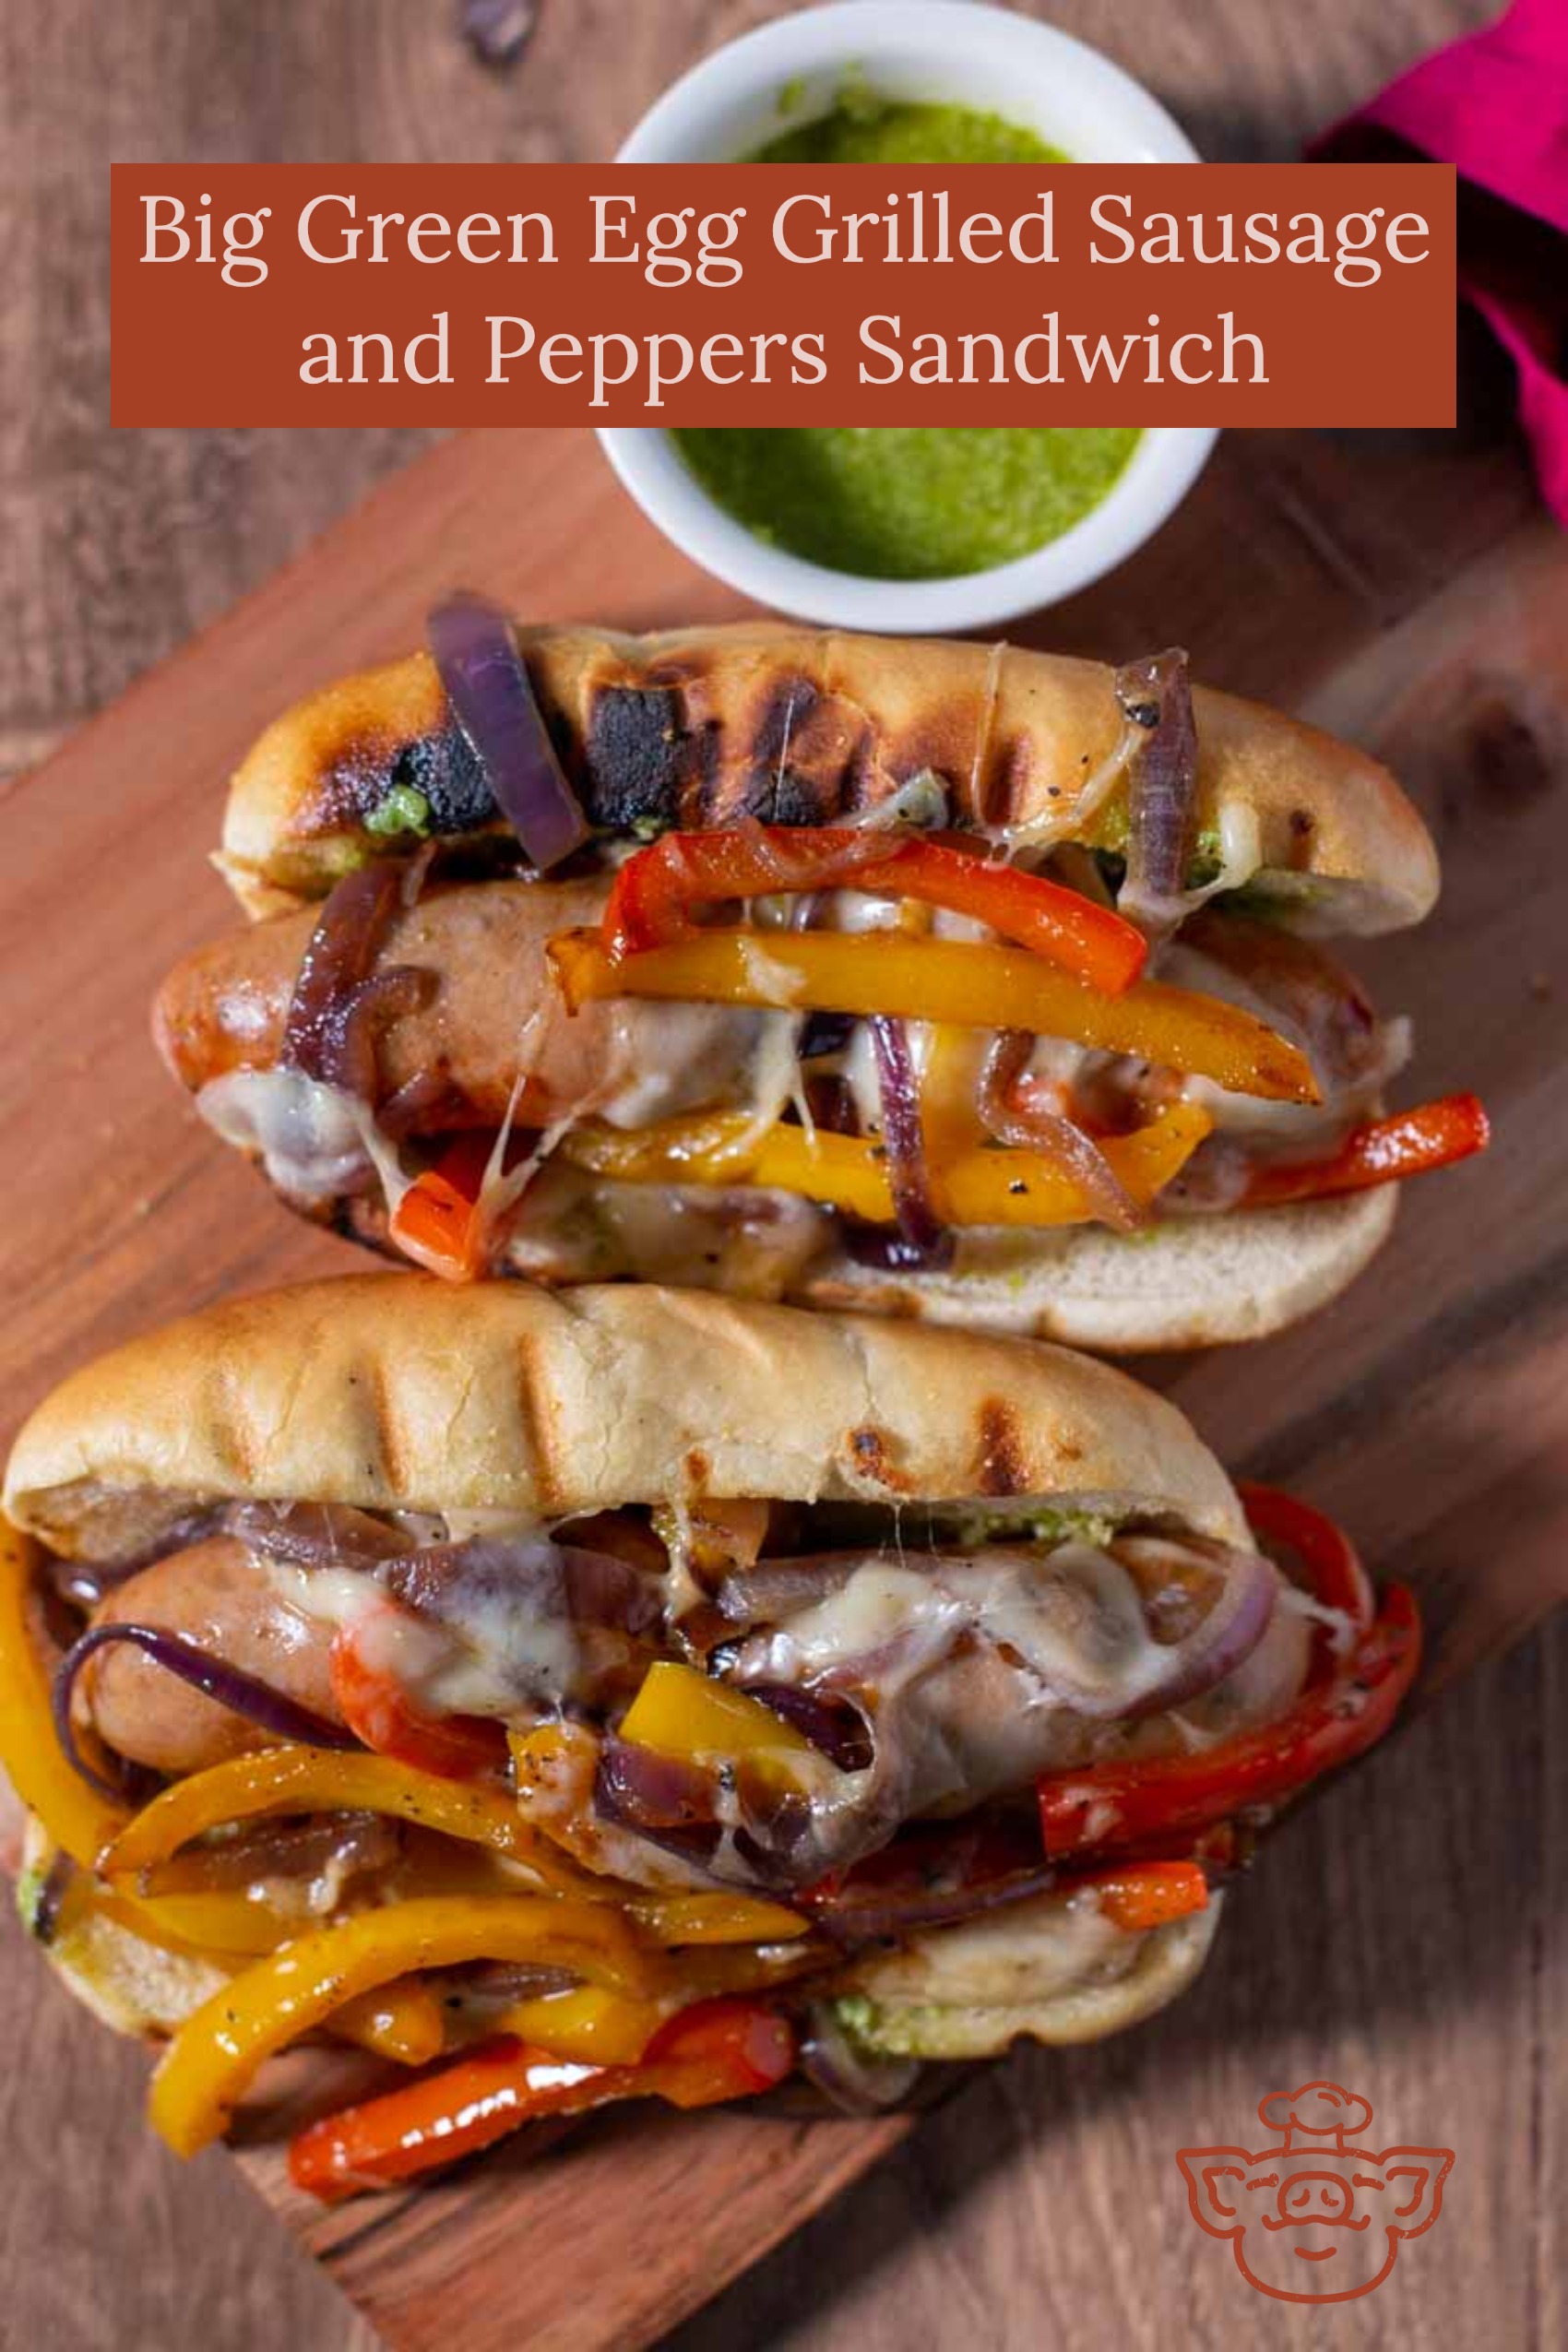 Big Green Egg Grilled Sausage and Peppers Sandwich